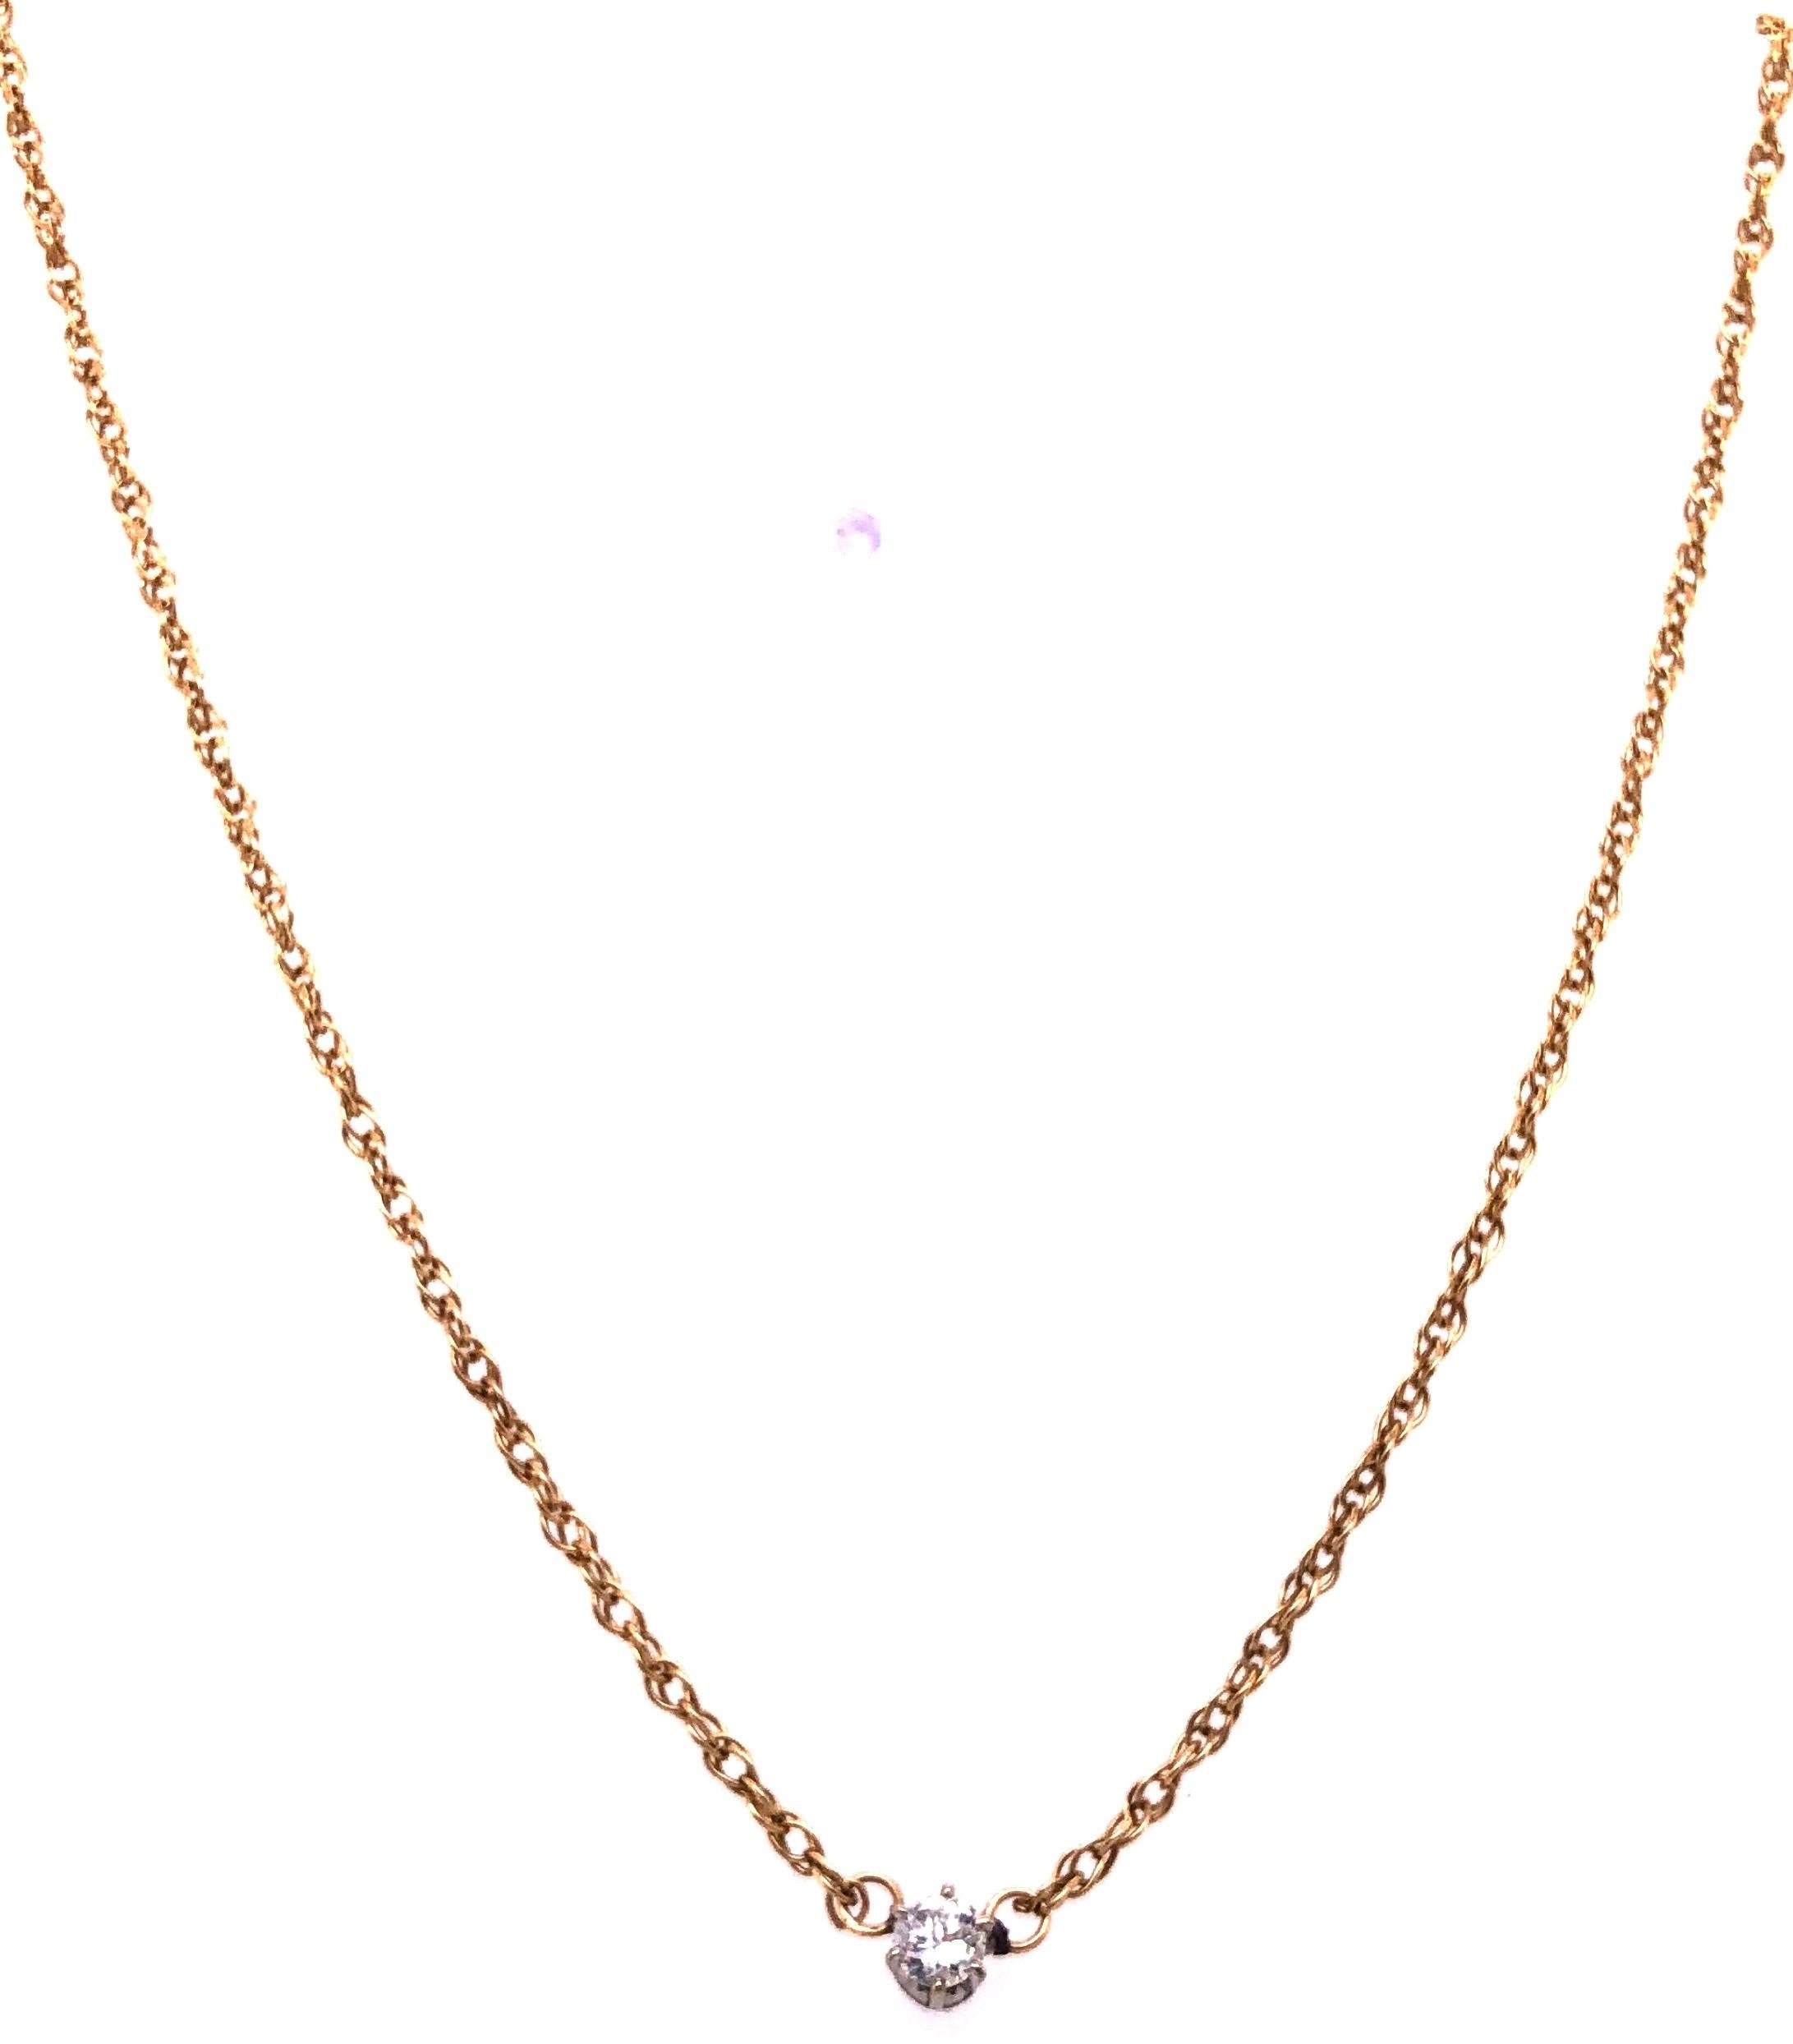 14 Karat Yellow Gold 16 inch Free Form Link with 0.25ct Round Diamond.
2.95 grams total weight.